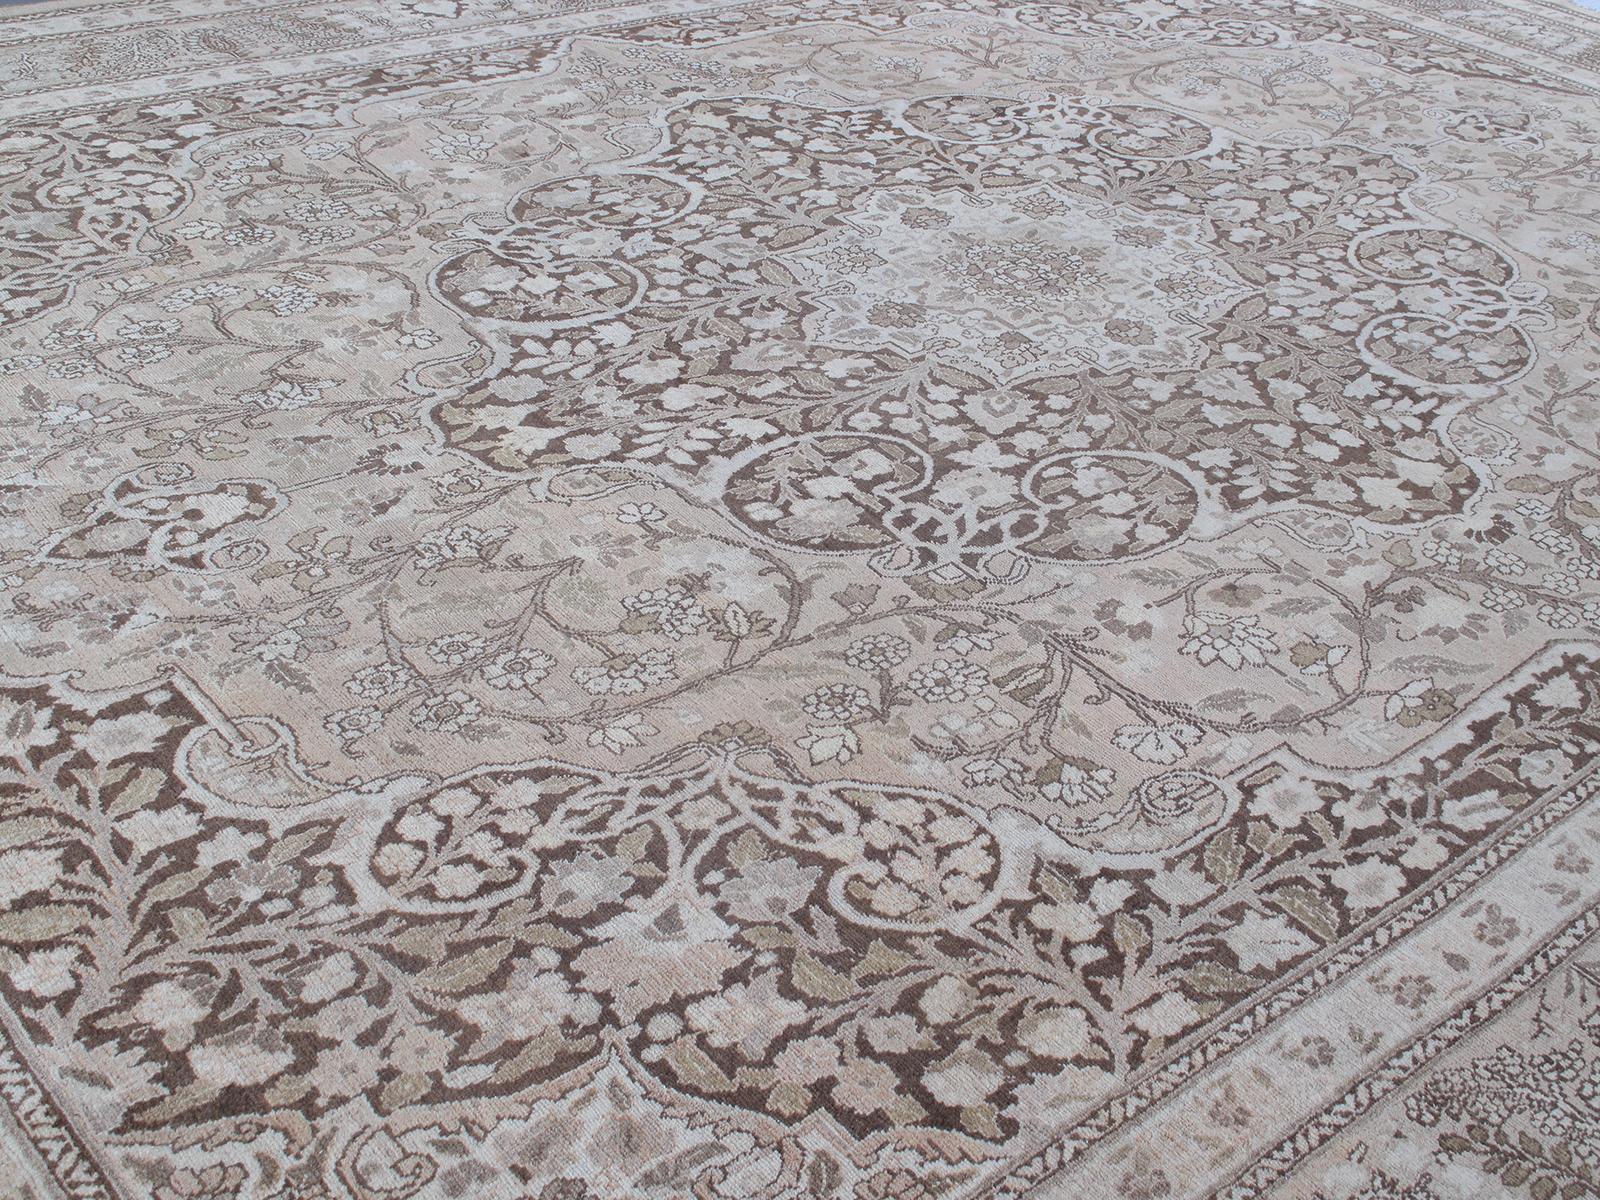 This antique Persian Tabriz Hadji Jalili hand-knotted rug is made from the finest hand-carded, hand-spun wool and all vegetable dyes. It represents the unique style of rug making that goes back over 150 years. The Hadji Jalili workshop created a